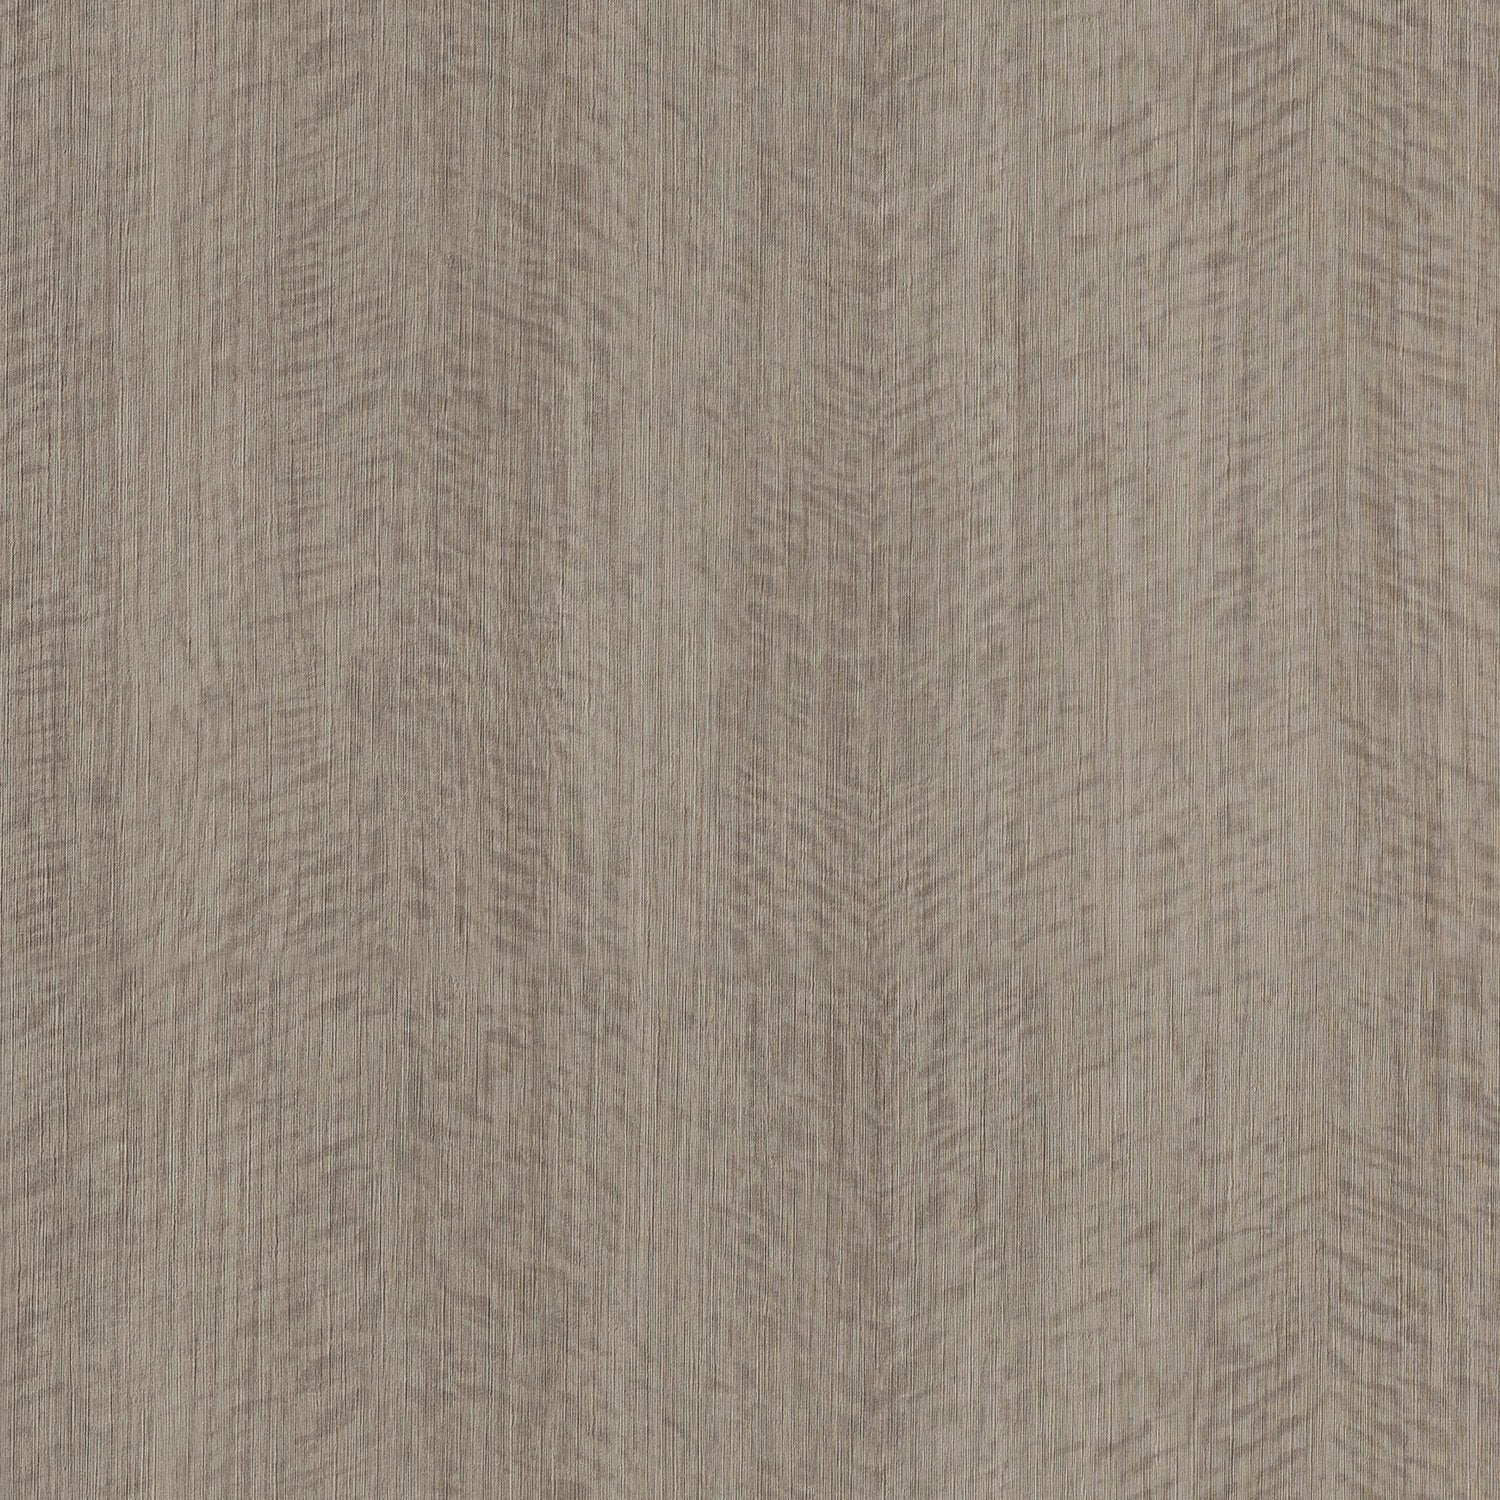 Woodn't It Be Nice - Y47873 - Wallcovering - Vycon - Kube Contract